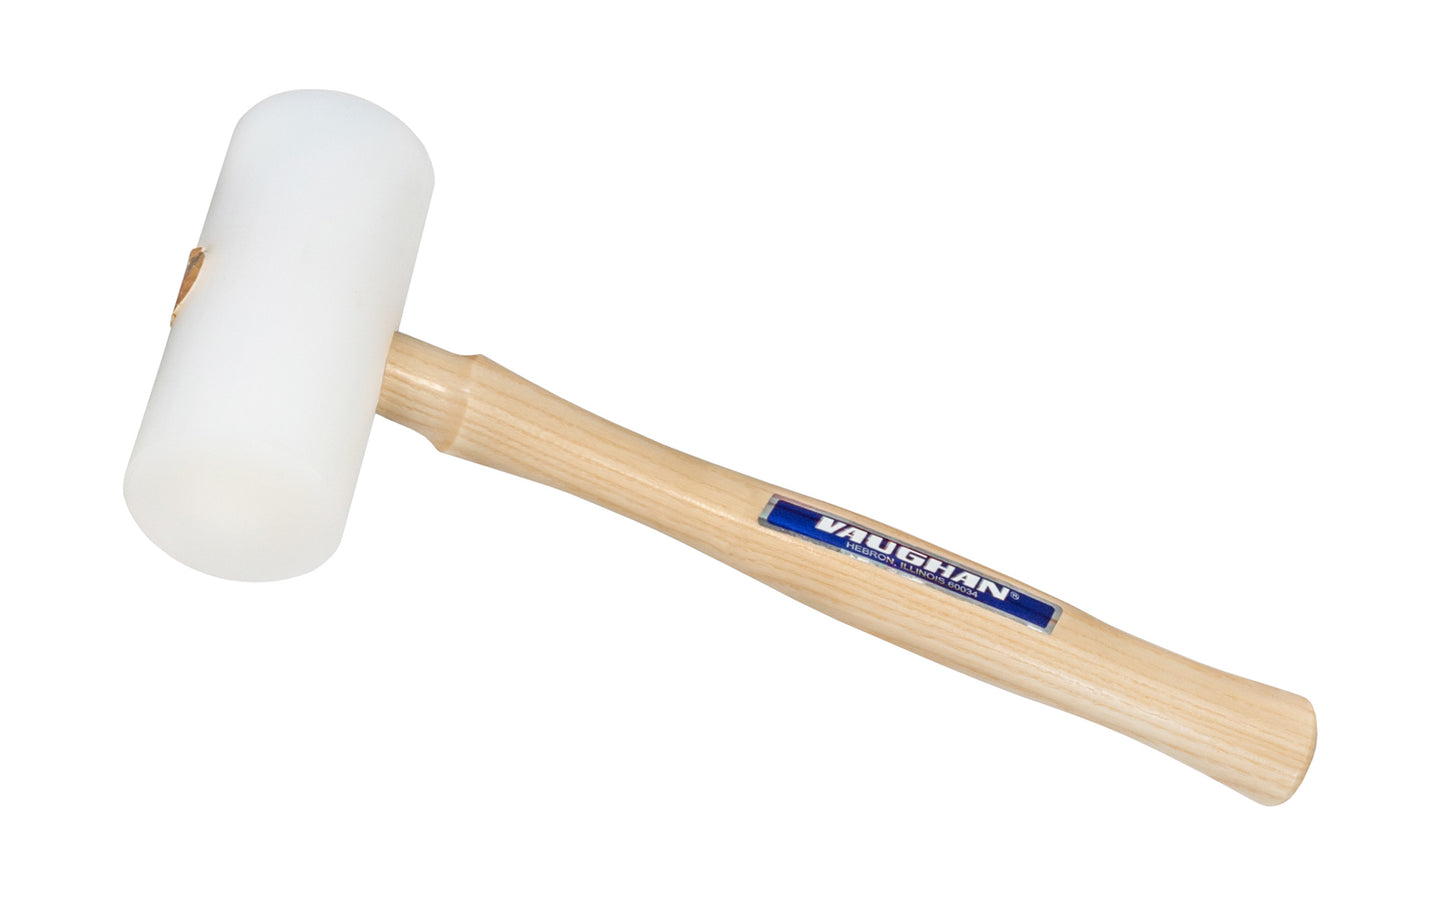 Vaughan Plastic Mallet ~ Made in England ~ High density polyethylene heads that are high impact & abrasion resistance. They will not fracture or delaminate. Highly resistant to acids & alkalis - Hardwood handle - PM175 - PM200 - PM250 - 7-3/4 oz - 10 oz - 17-3/4 oz - 1-3/4" face - 2" face - 2-3/8" face